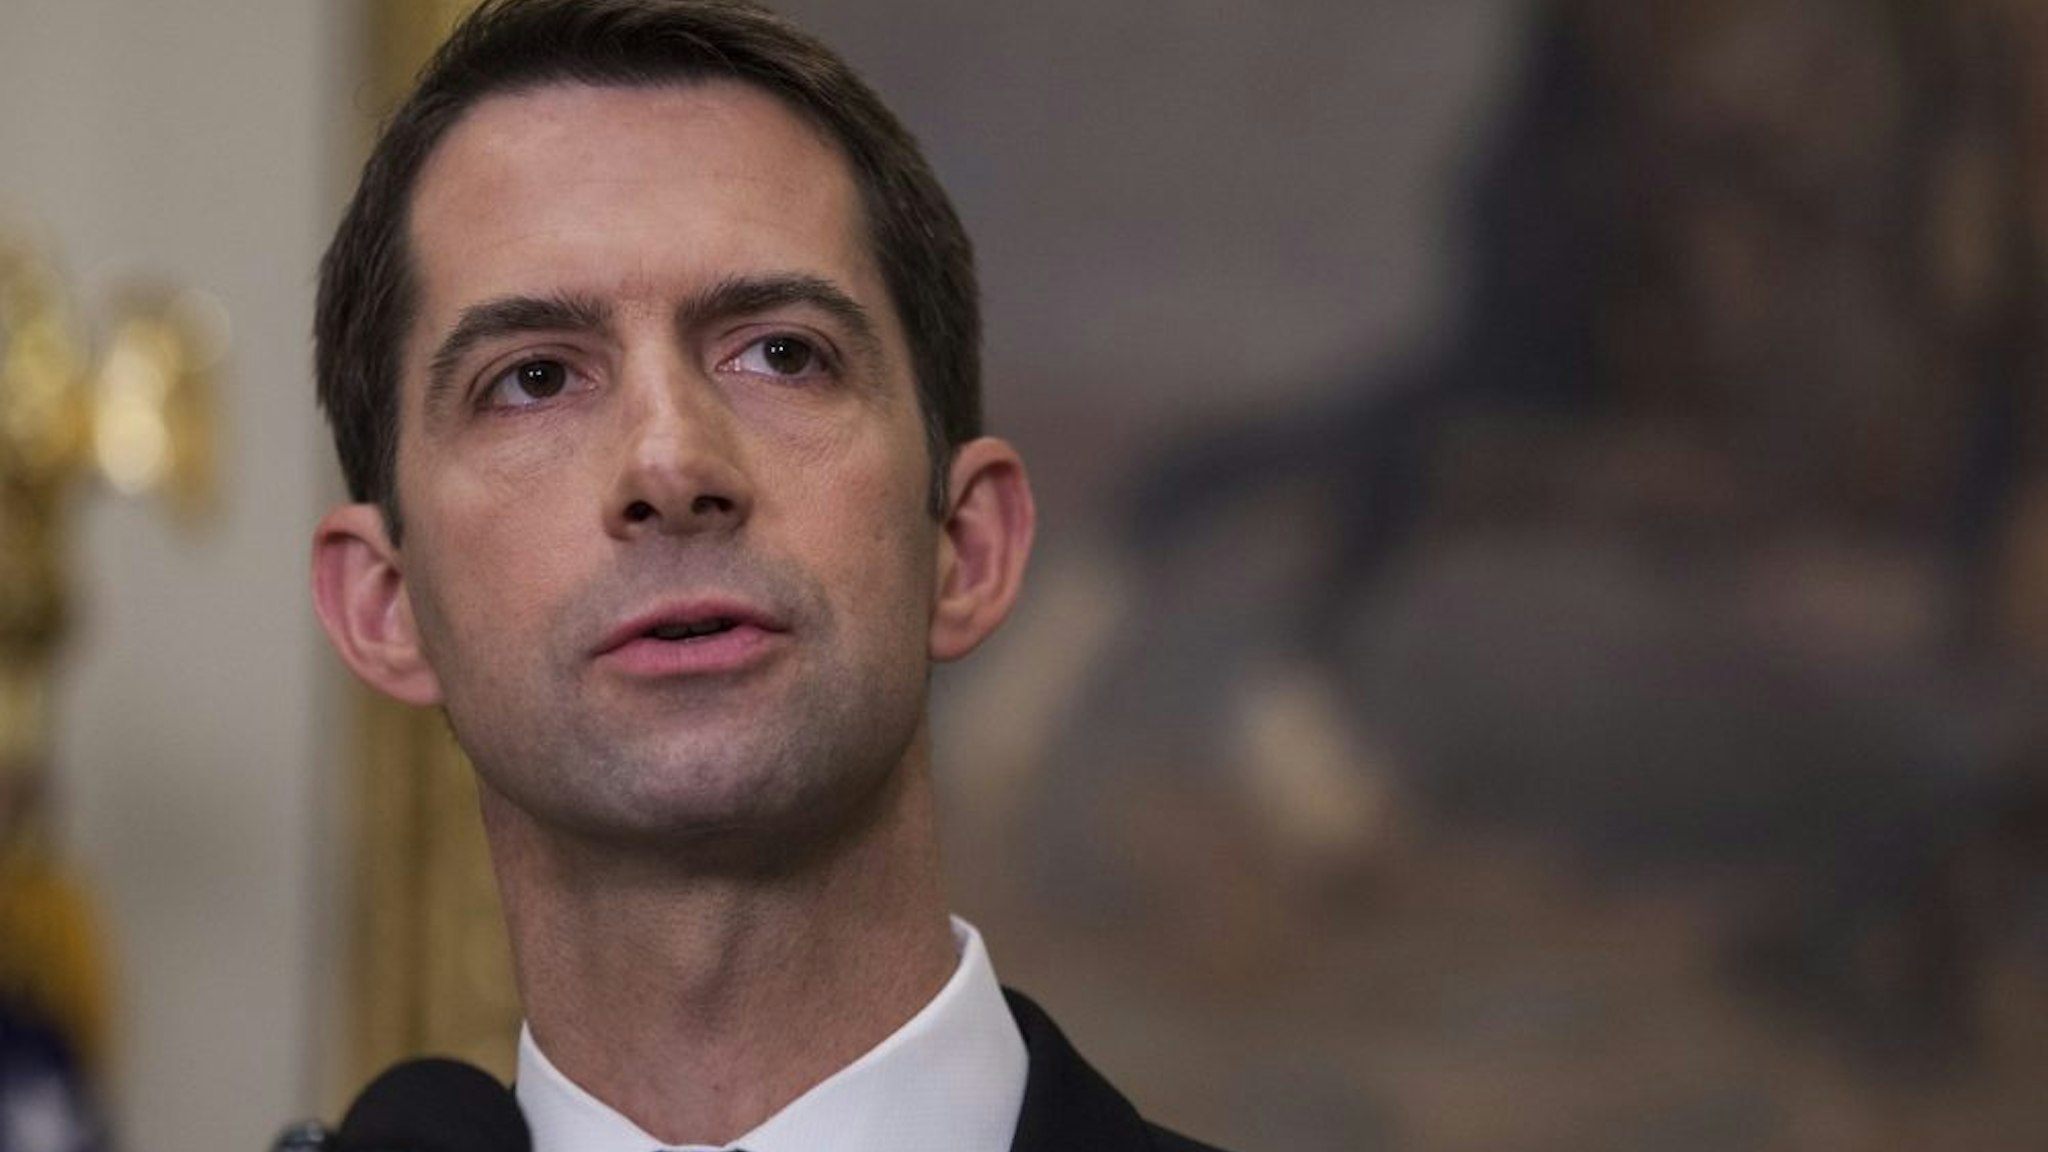 WASHINGTON, DC - AUGUST 2: (AFP OUT) Sen. Tom Cotton (R-AR) makes an announcement on the introduction of the Reforming American Immigration for a Strong Economy (RAISE) Act in the Roosevelt Room at the White House on August 2, 2017 in Washington, DC. The act aims to overhaul U.S. immigration by moving towards a "merit-based" system.